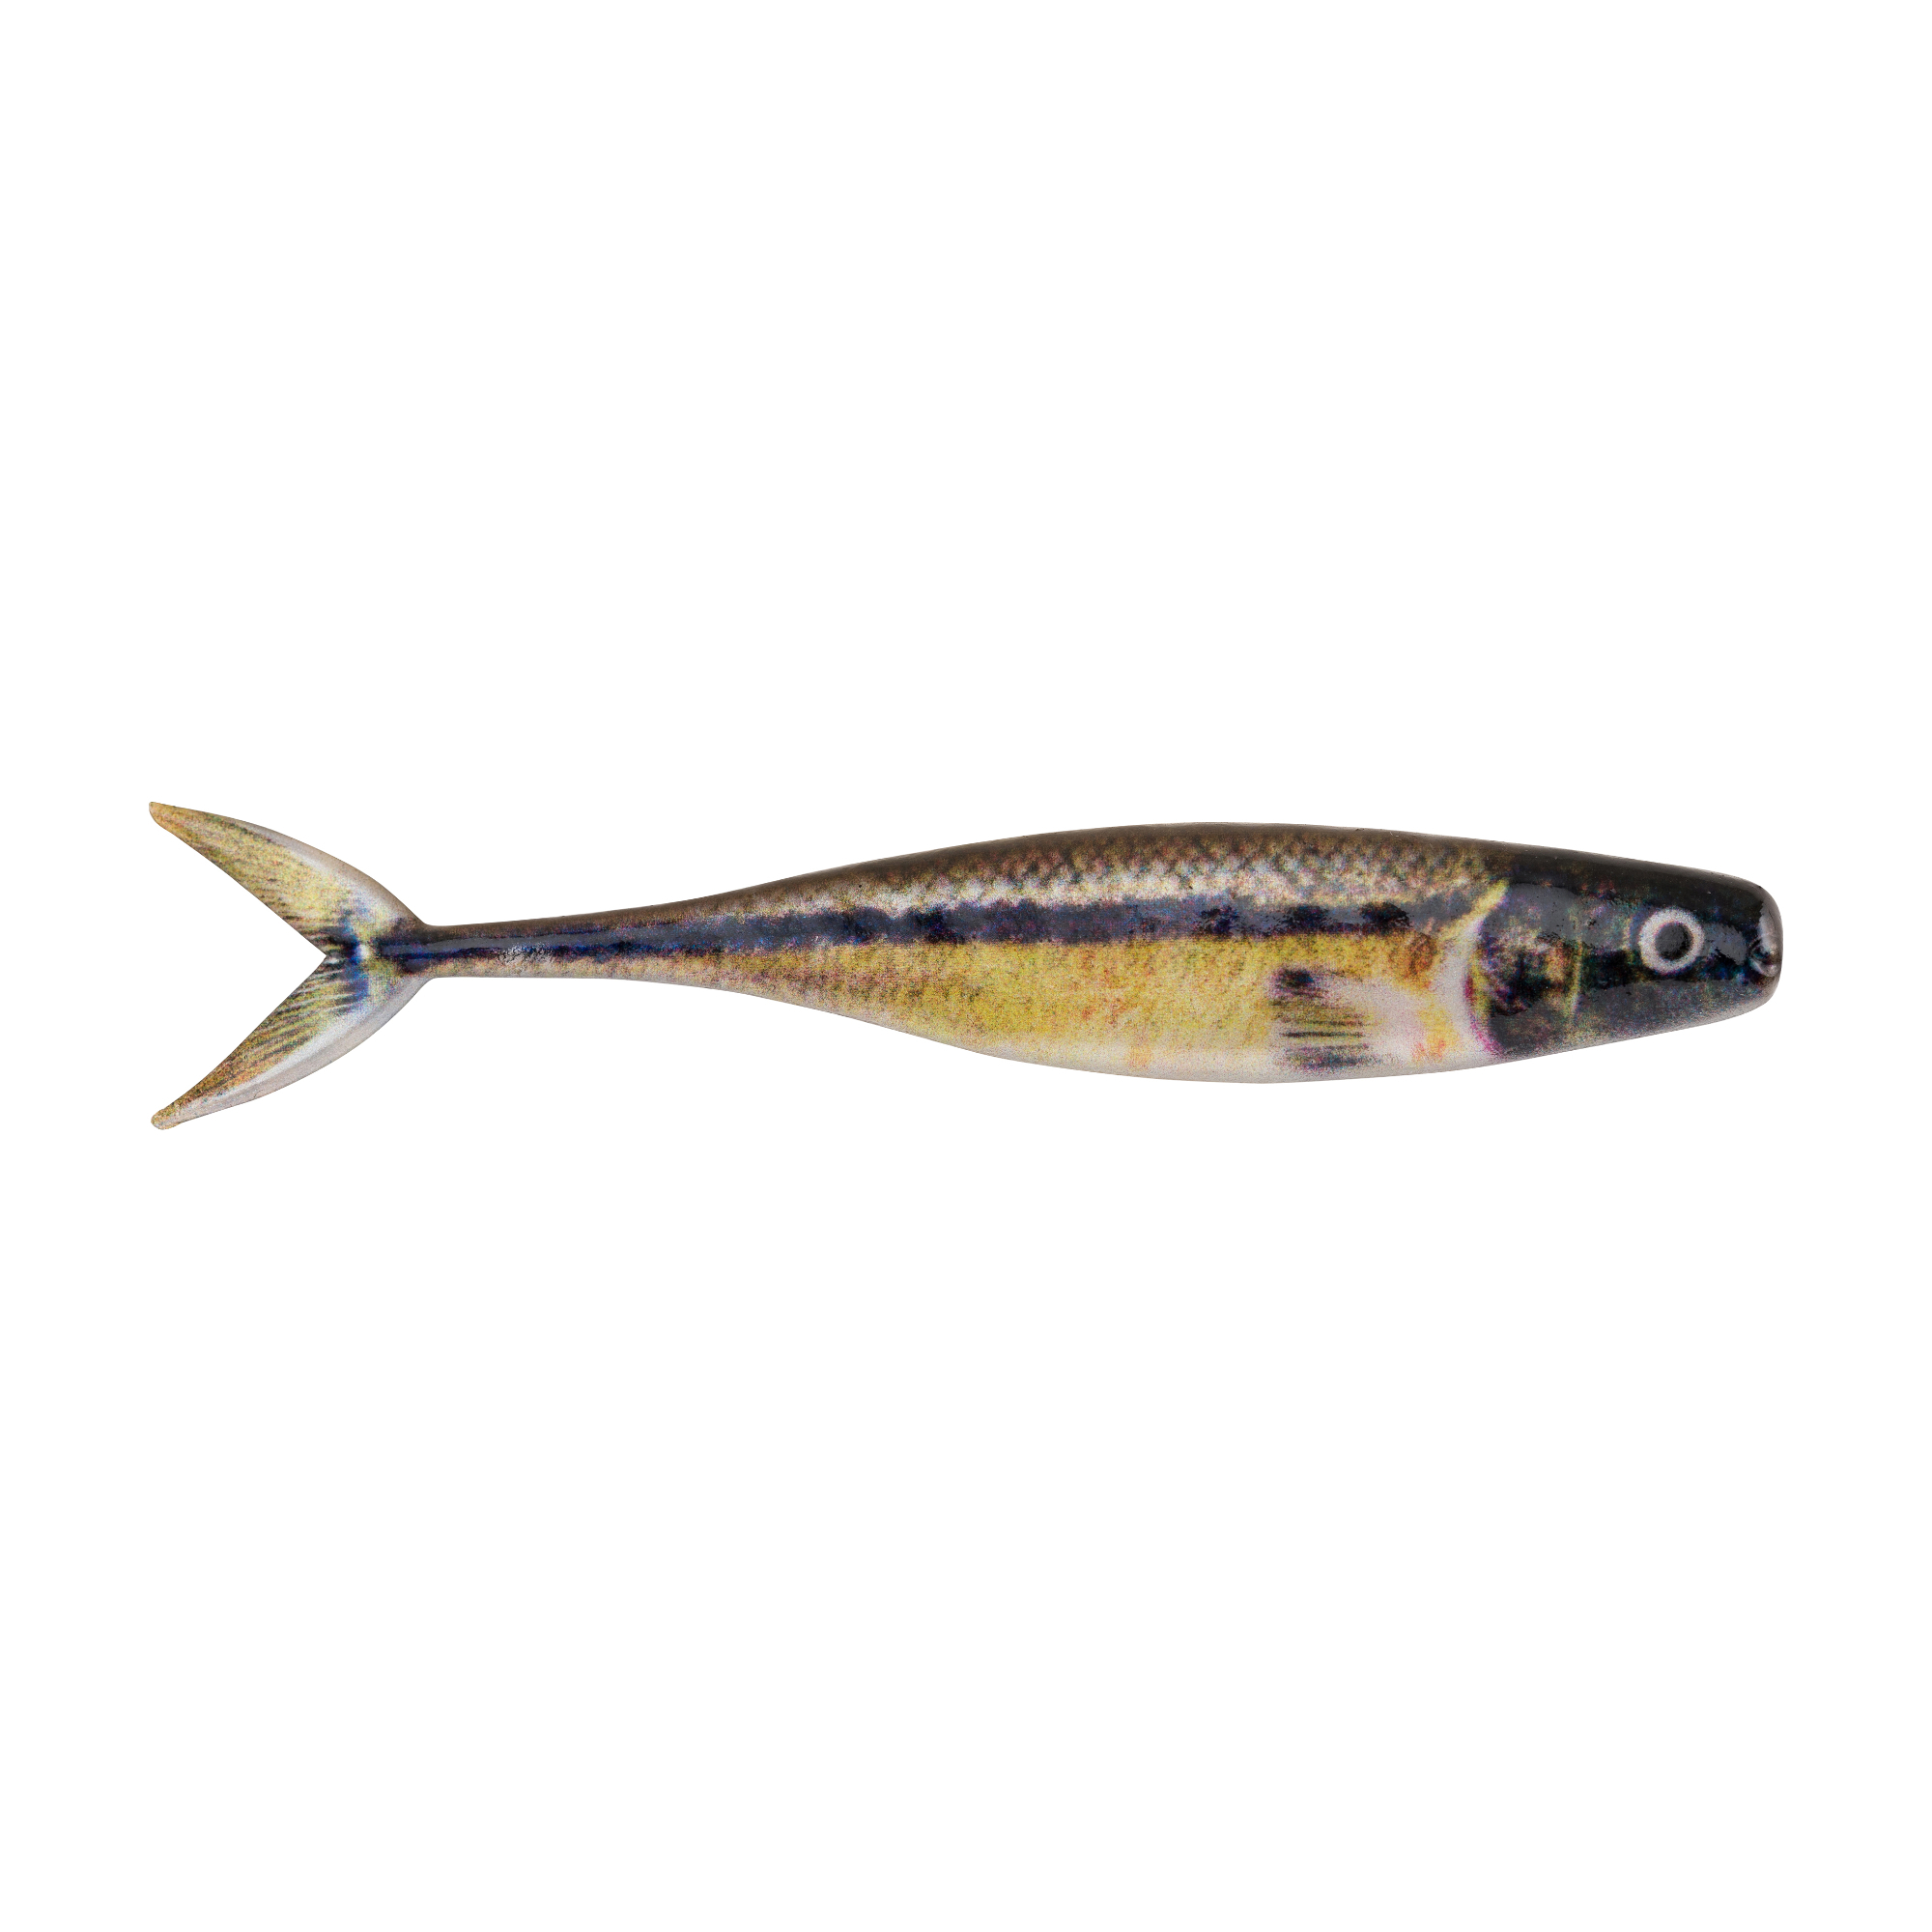 23 New Product Review - Berkley Saltwater Powerbait and Gulp Chrome 